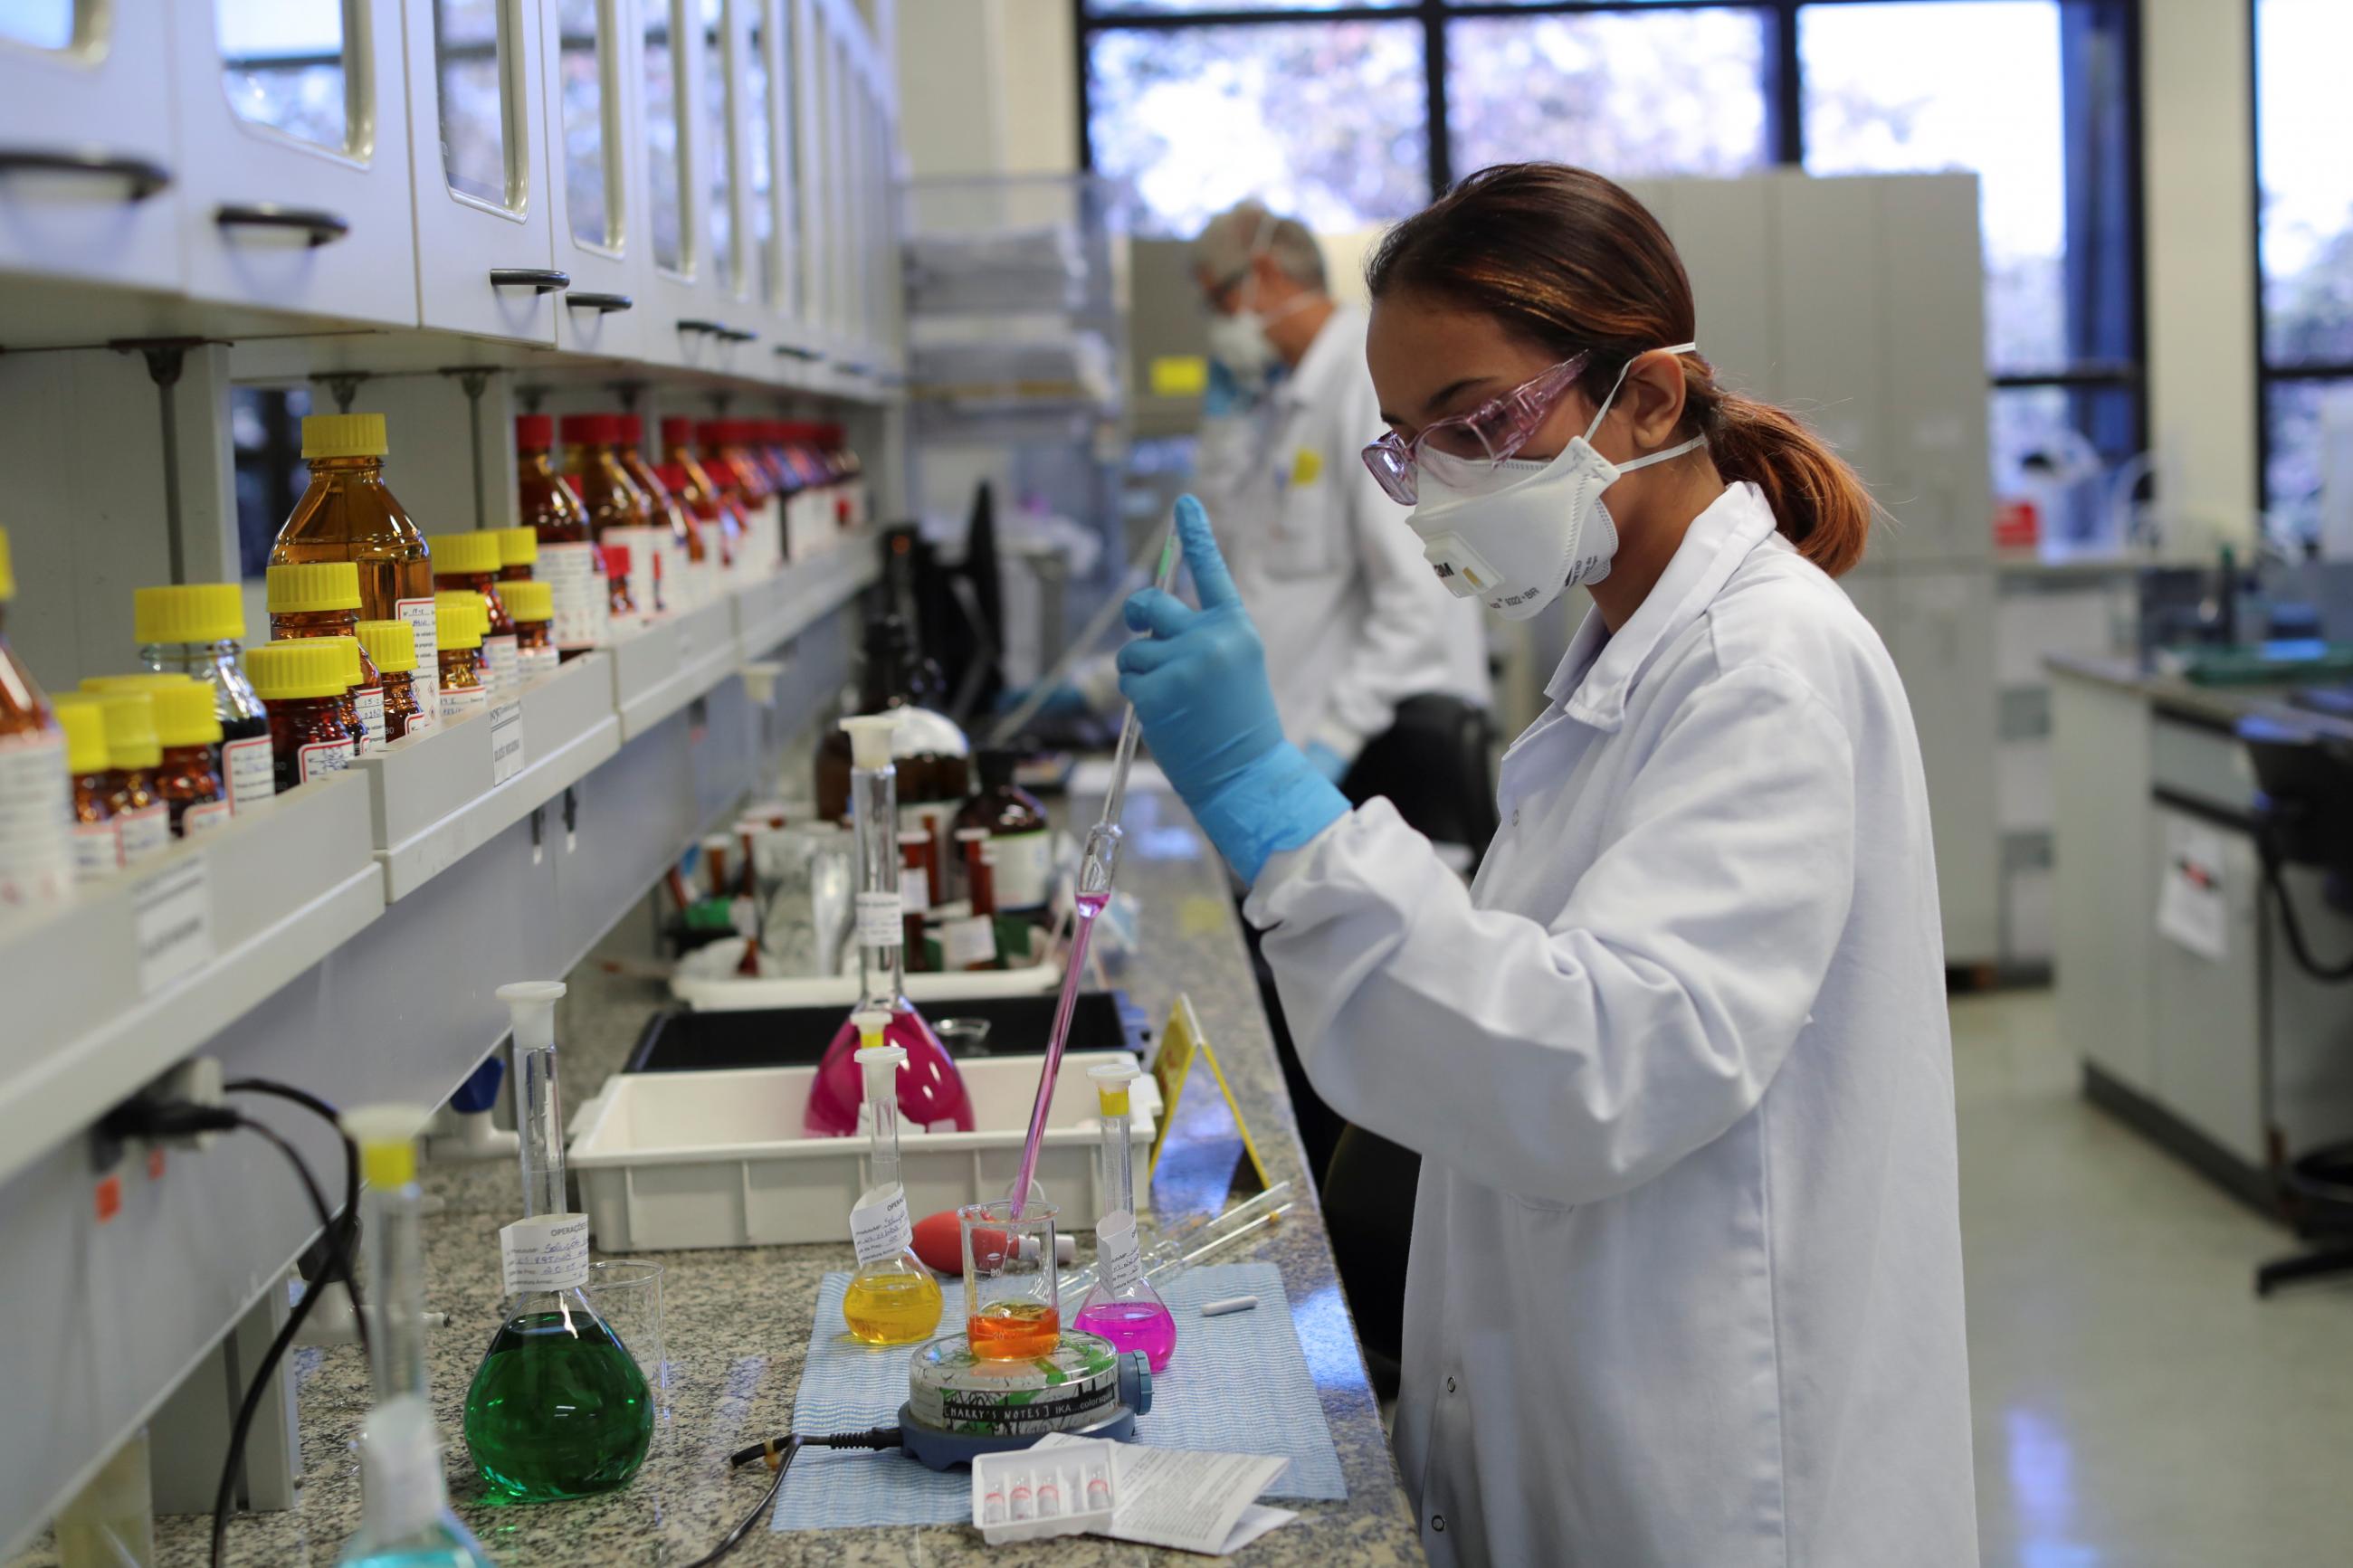 An employee tests the quality of Sputnik V vaccines against COVID-19 in the lab of a Brazilian pharmaceutical company